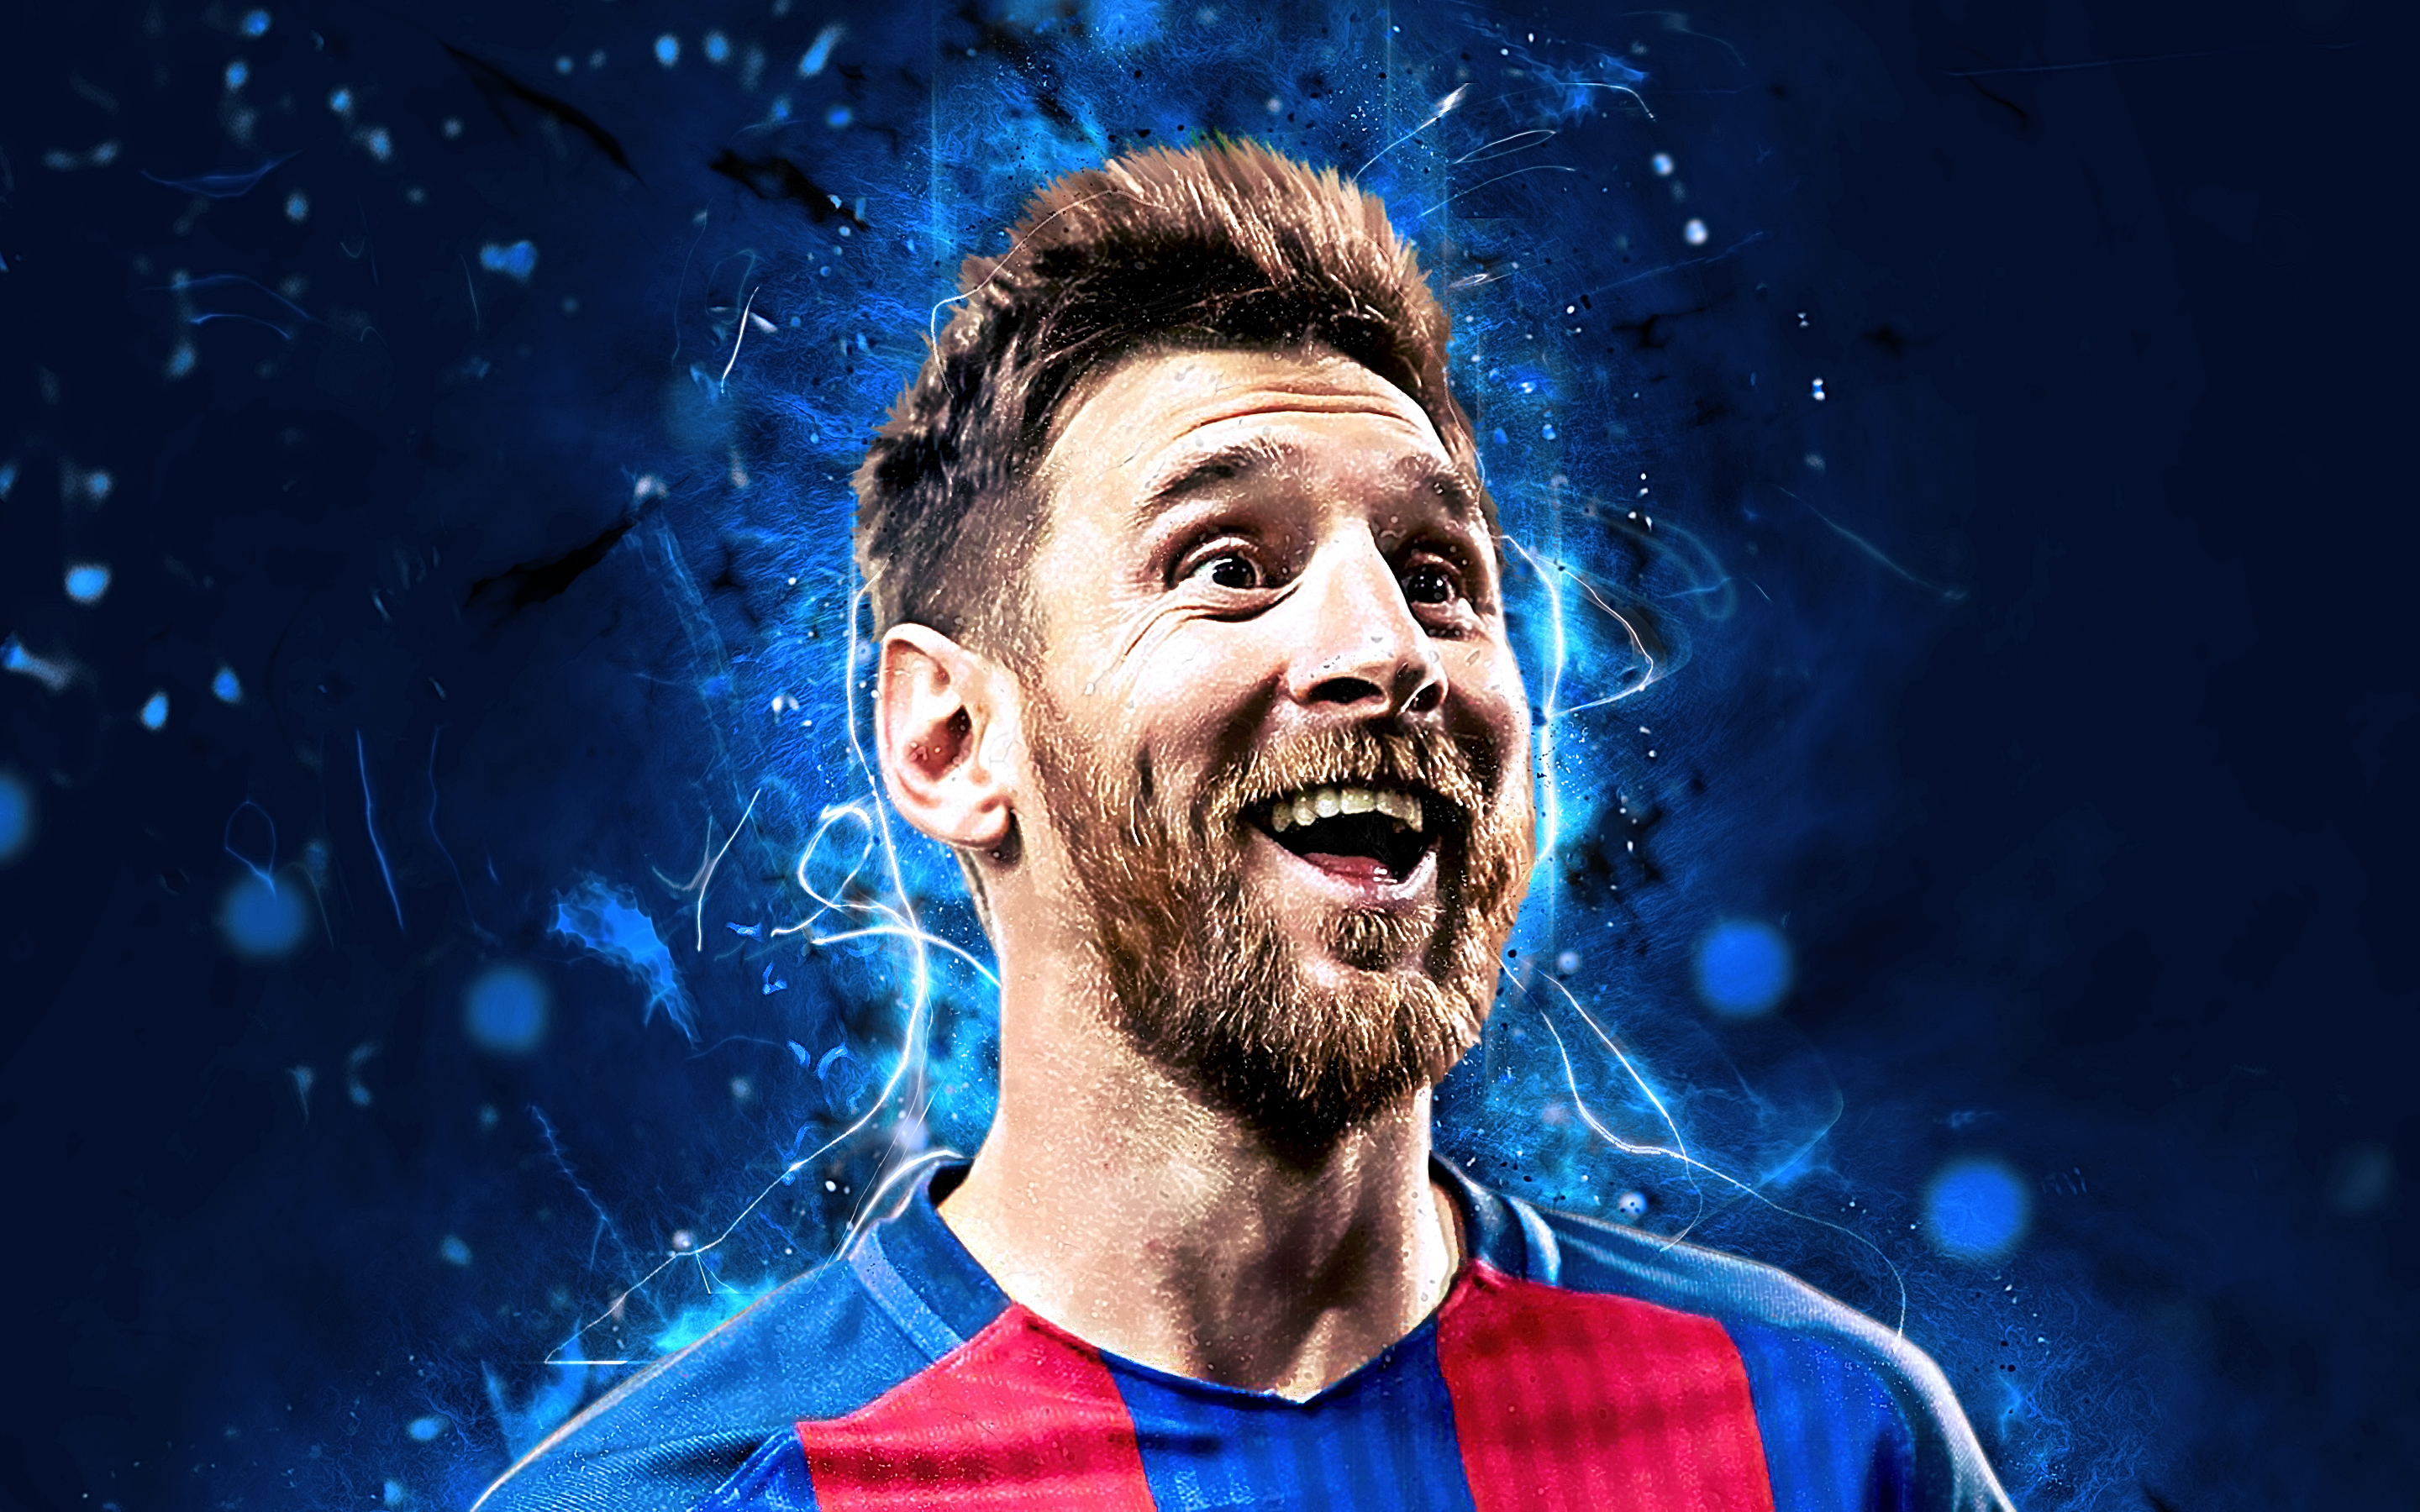 Lionel Messi 4k Wallpapers Hd Wallpapers Id 25154 Images And Photos